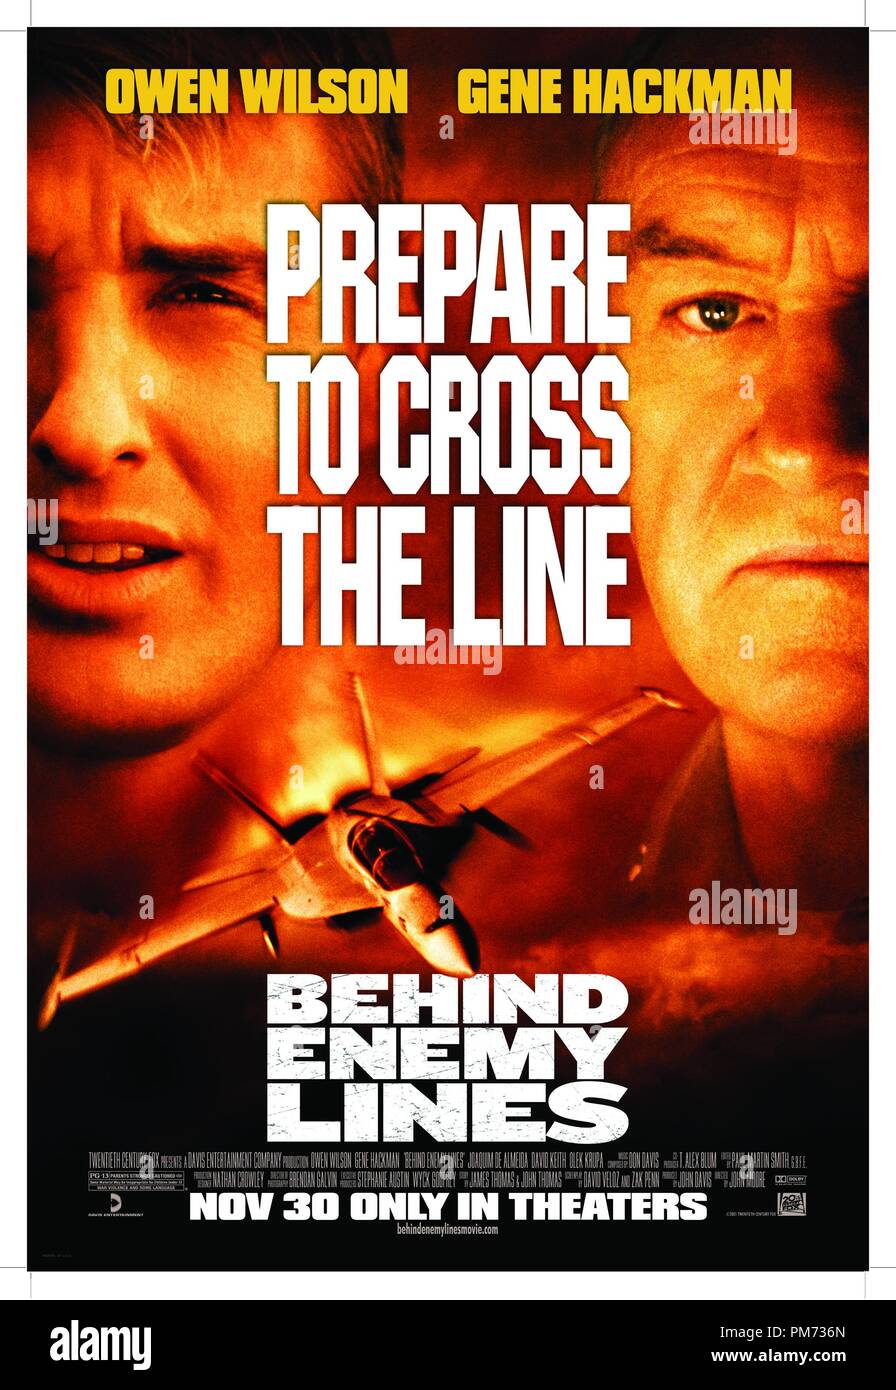 Film Still / Publicity Still from 'Behind Enemy Lines' Poster © 2001 20th Century Fox File Reference # 308471380THA  For Editorial Use Only -  All Rights Reserved Stock Photo